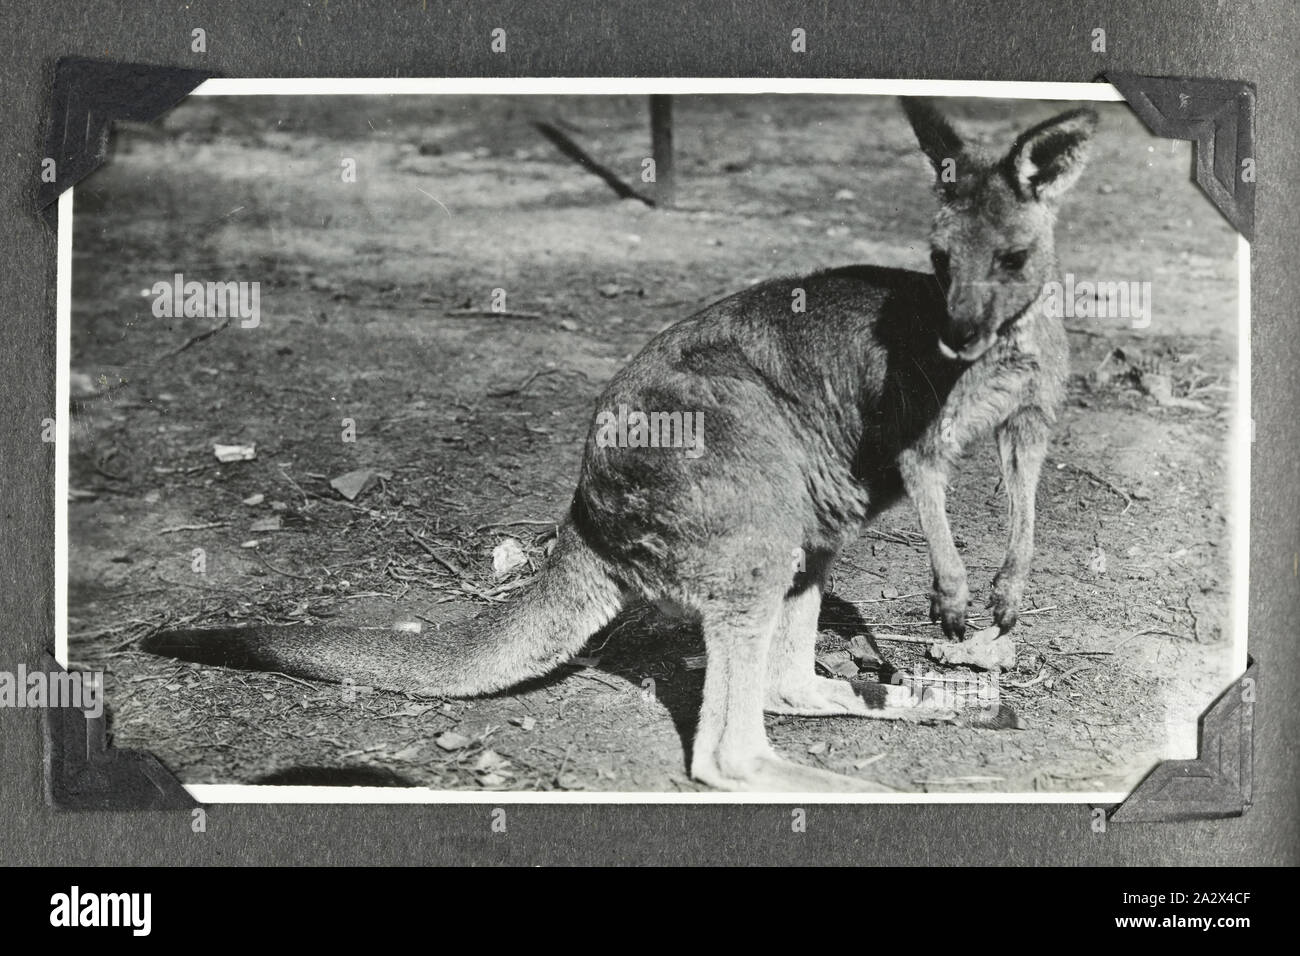 Photograph - 'One of the Animals in Zoo', Victoria, 1937-1939, Black and white photograph of a kangaroo at HMAS Cerberus One of 48 photographs in a photographic album. Taken by D.R.Goodwin, Royal Australian Navy (R.A.N.) 1937-1939. The images are of H.M.A.S Cerberus and other naval ships, naval training and field gun crews Stock Photo